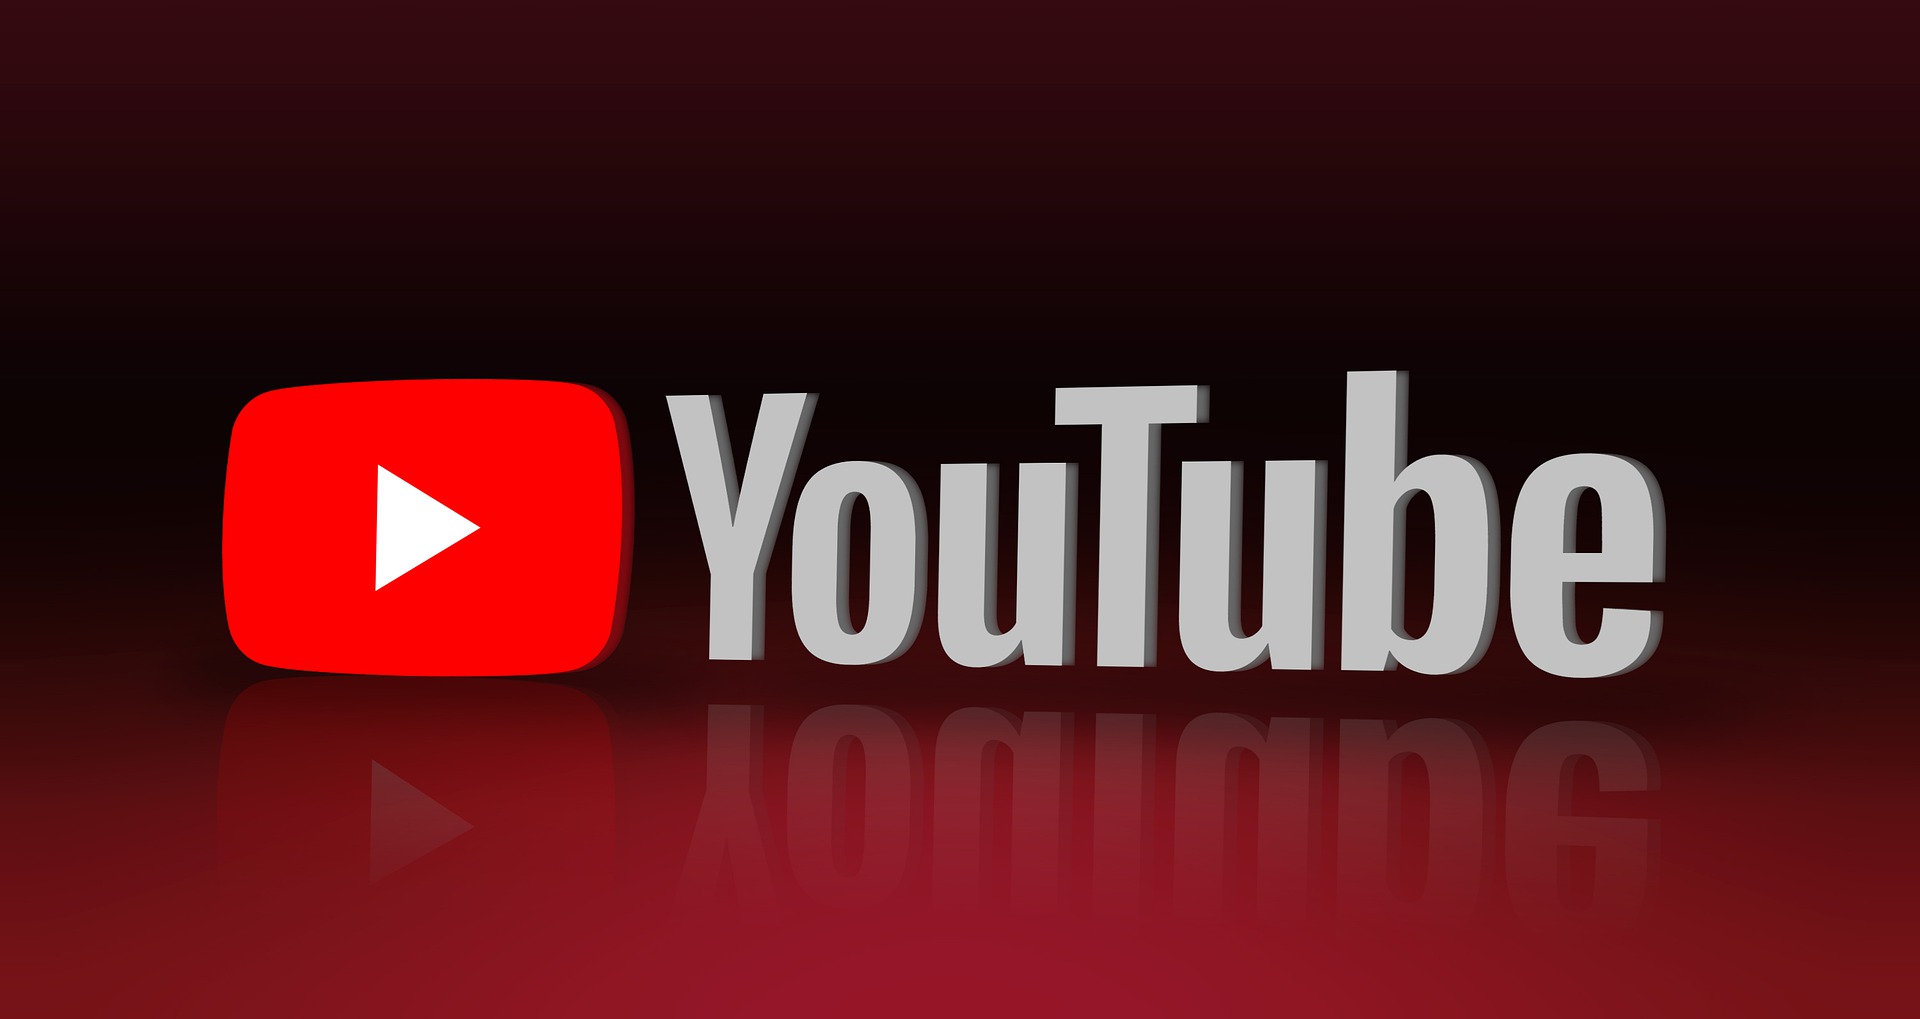 How to download YouTube videos free? 